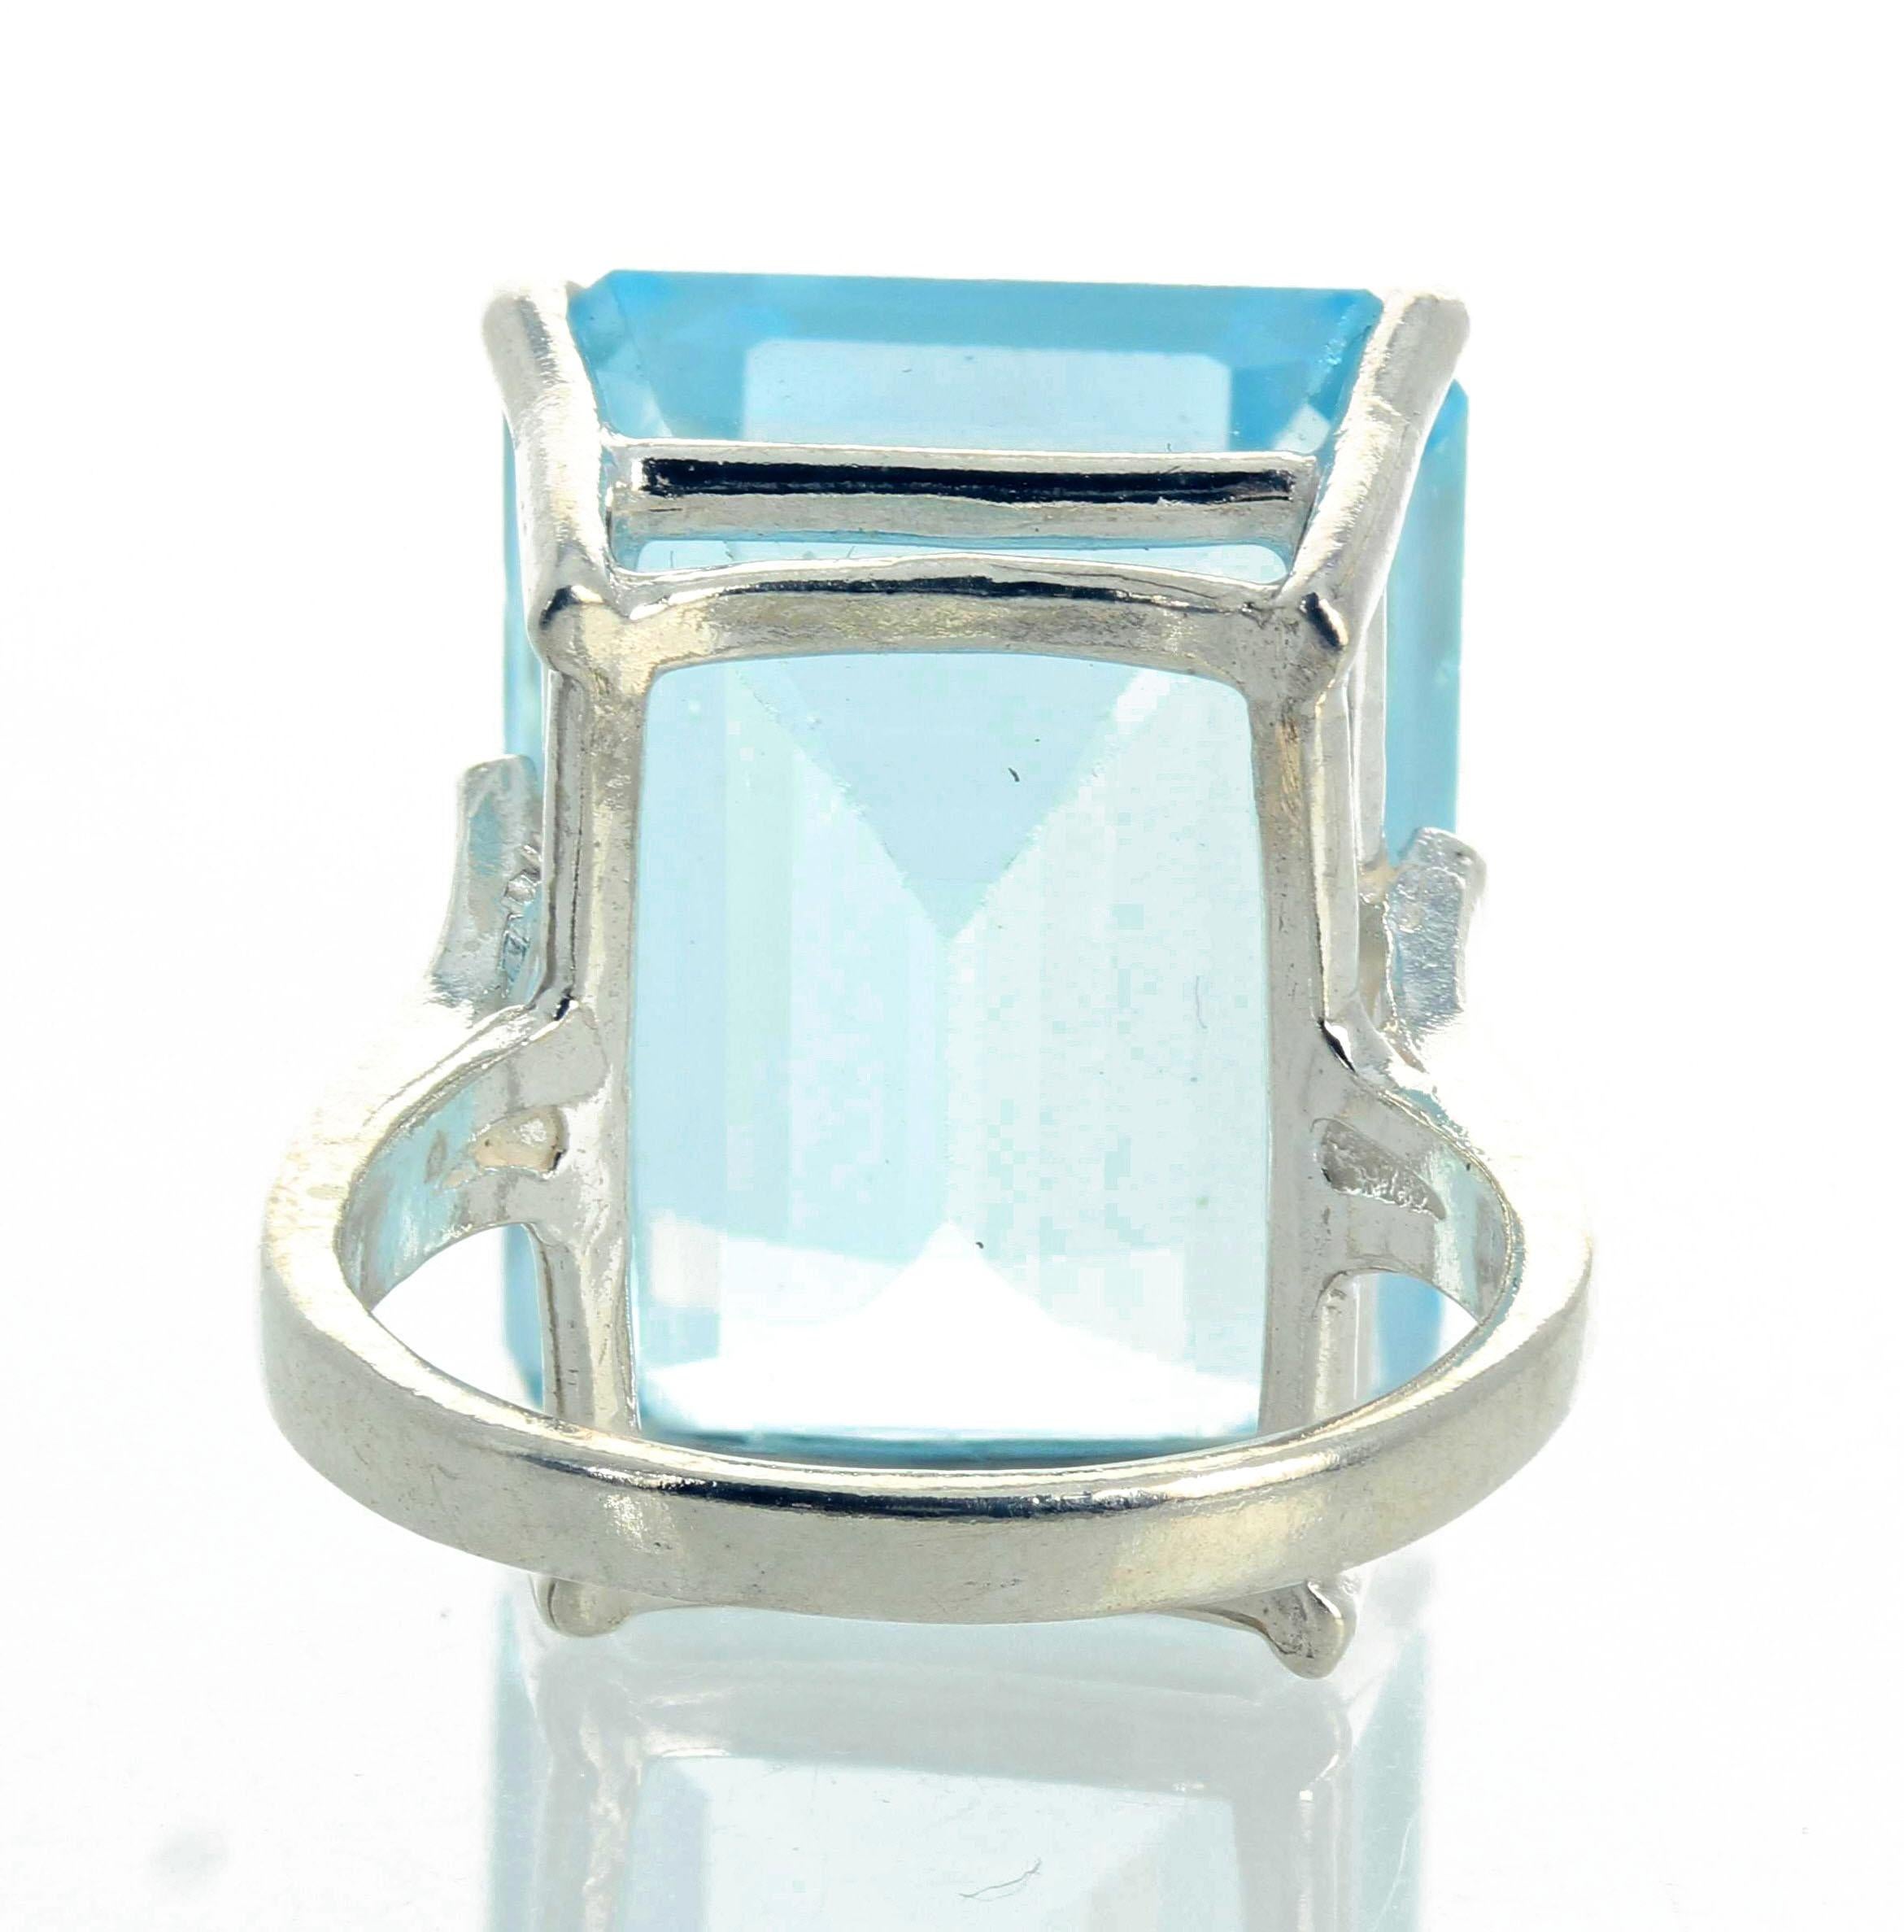 AJD Gorgeous REAL Cushion Cut 18 Ct Natural Aquamarine Silver Solitaire Ring 1